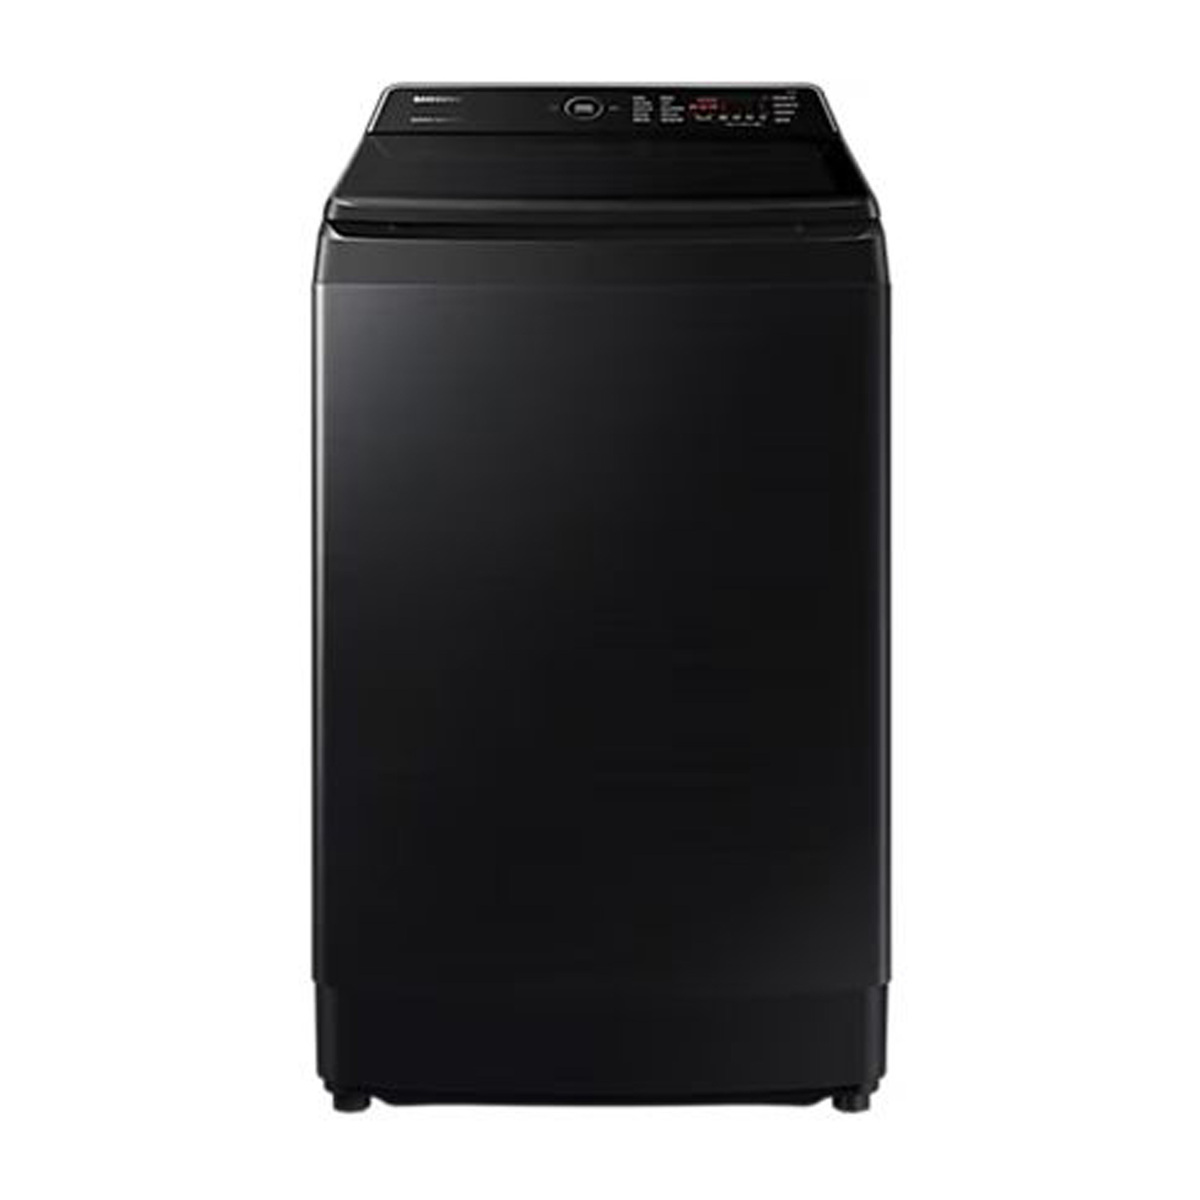 Samsung Top load Washer with Ecobubble and Digital Inverter Technology, 13 kg, 700 RPM, Black, WA13CG5745BVSG